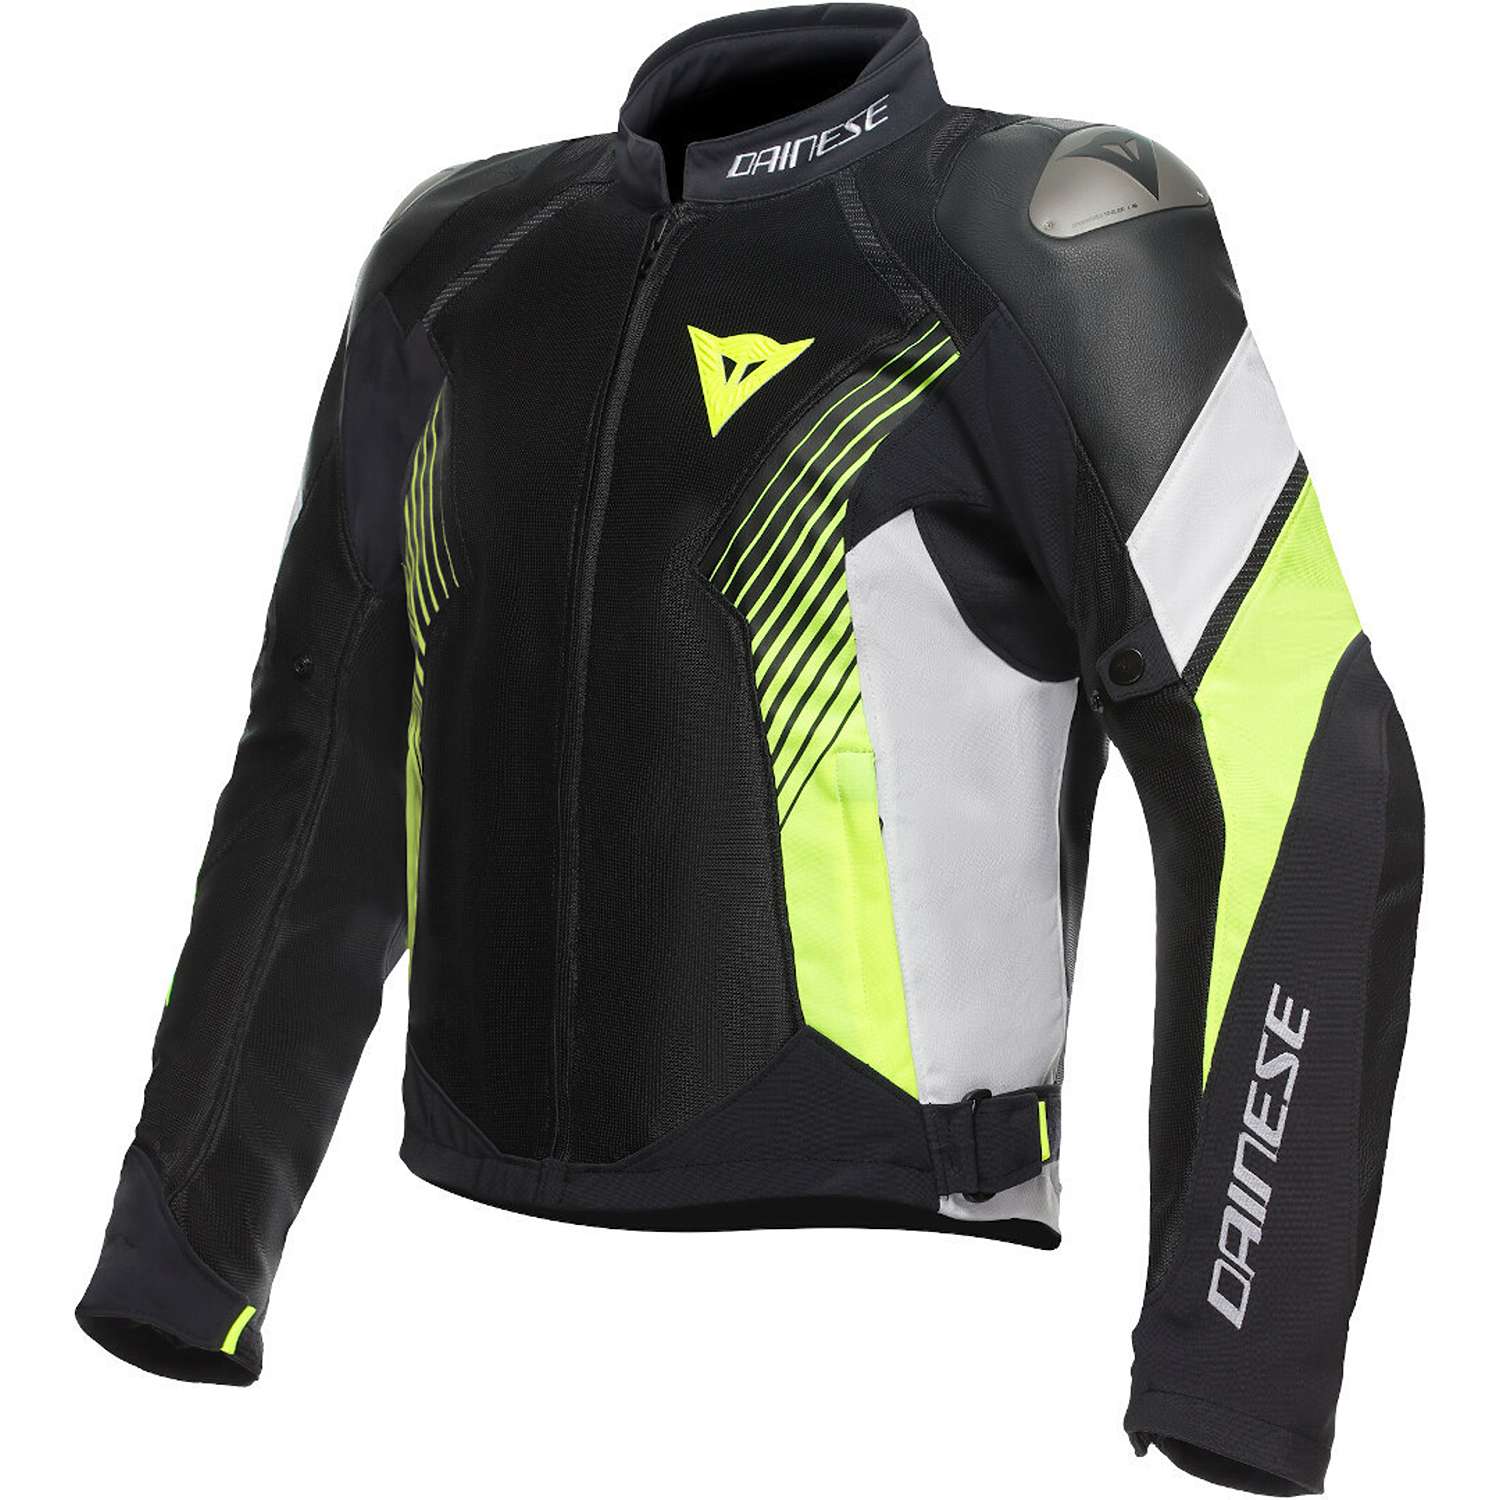 Image of Dainese Super Rider 2 Absoluteshell Jacket Black White Fluo Yellow Talla 44